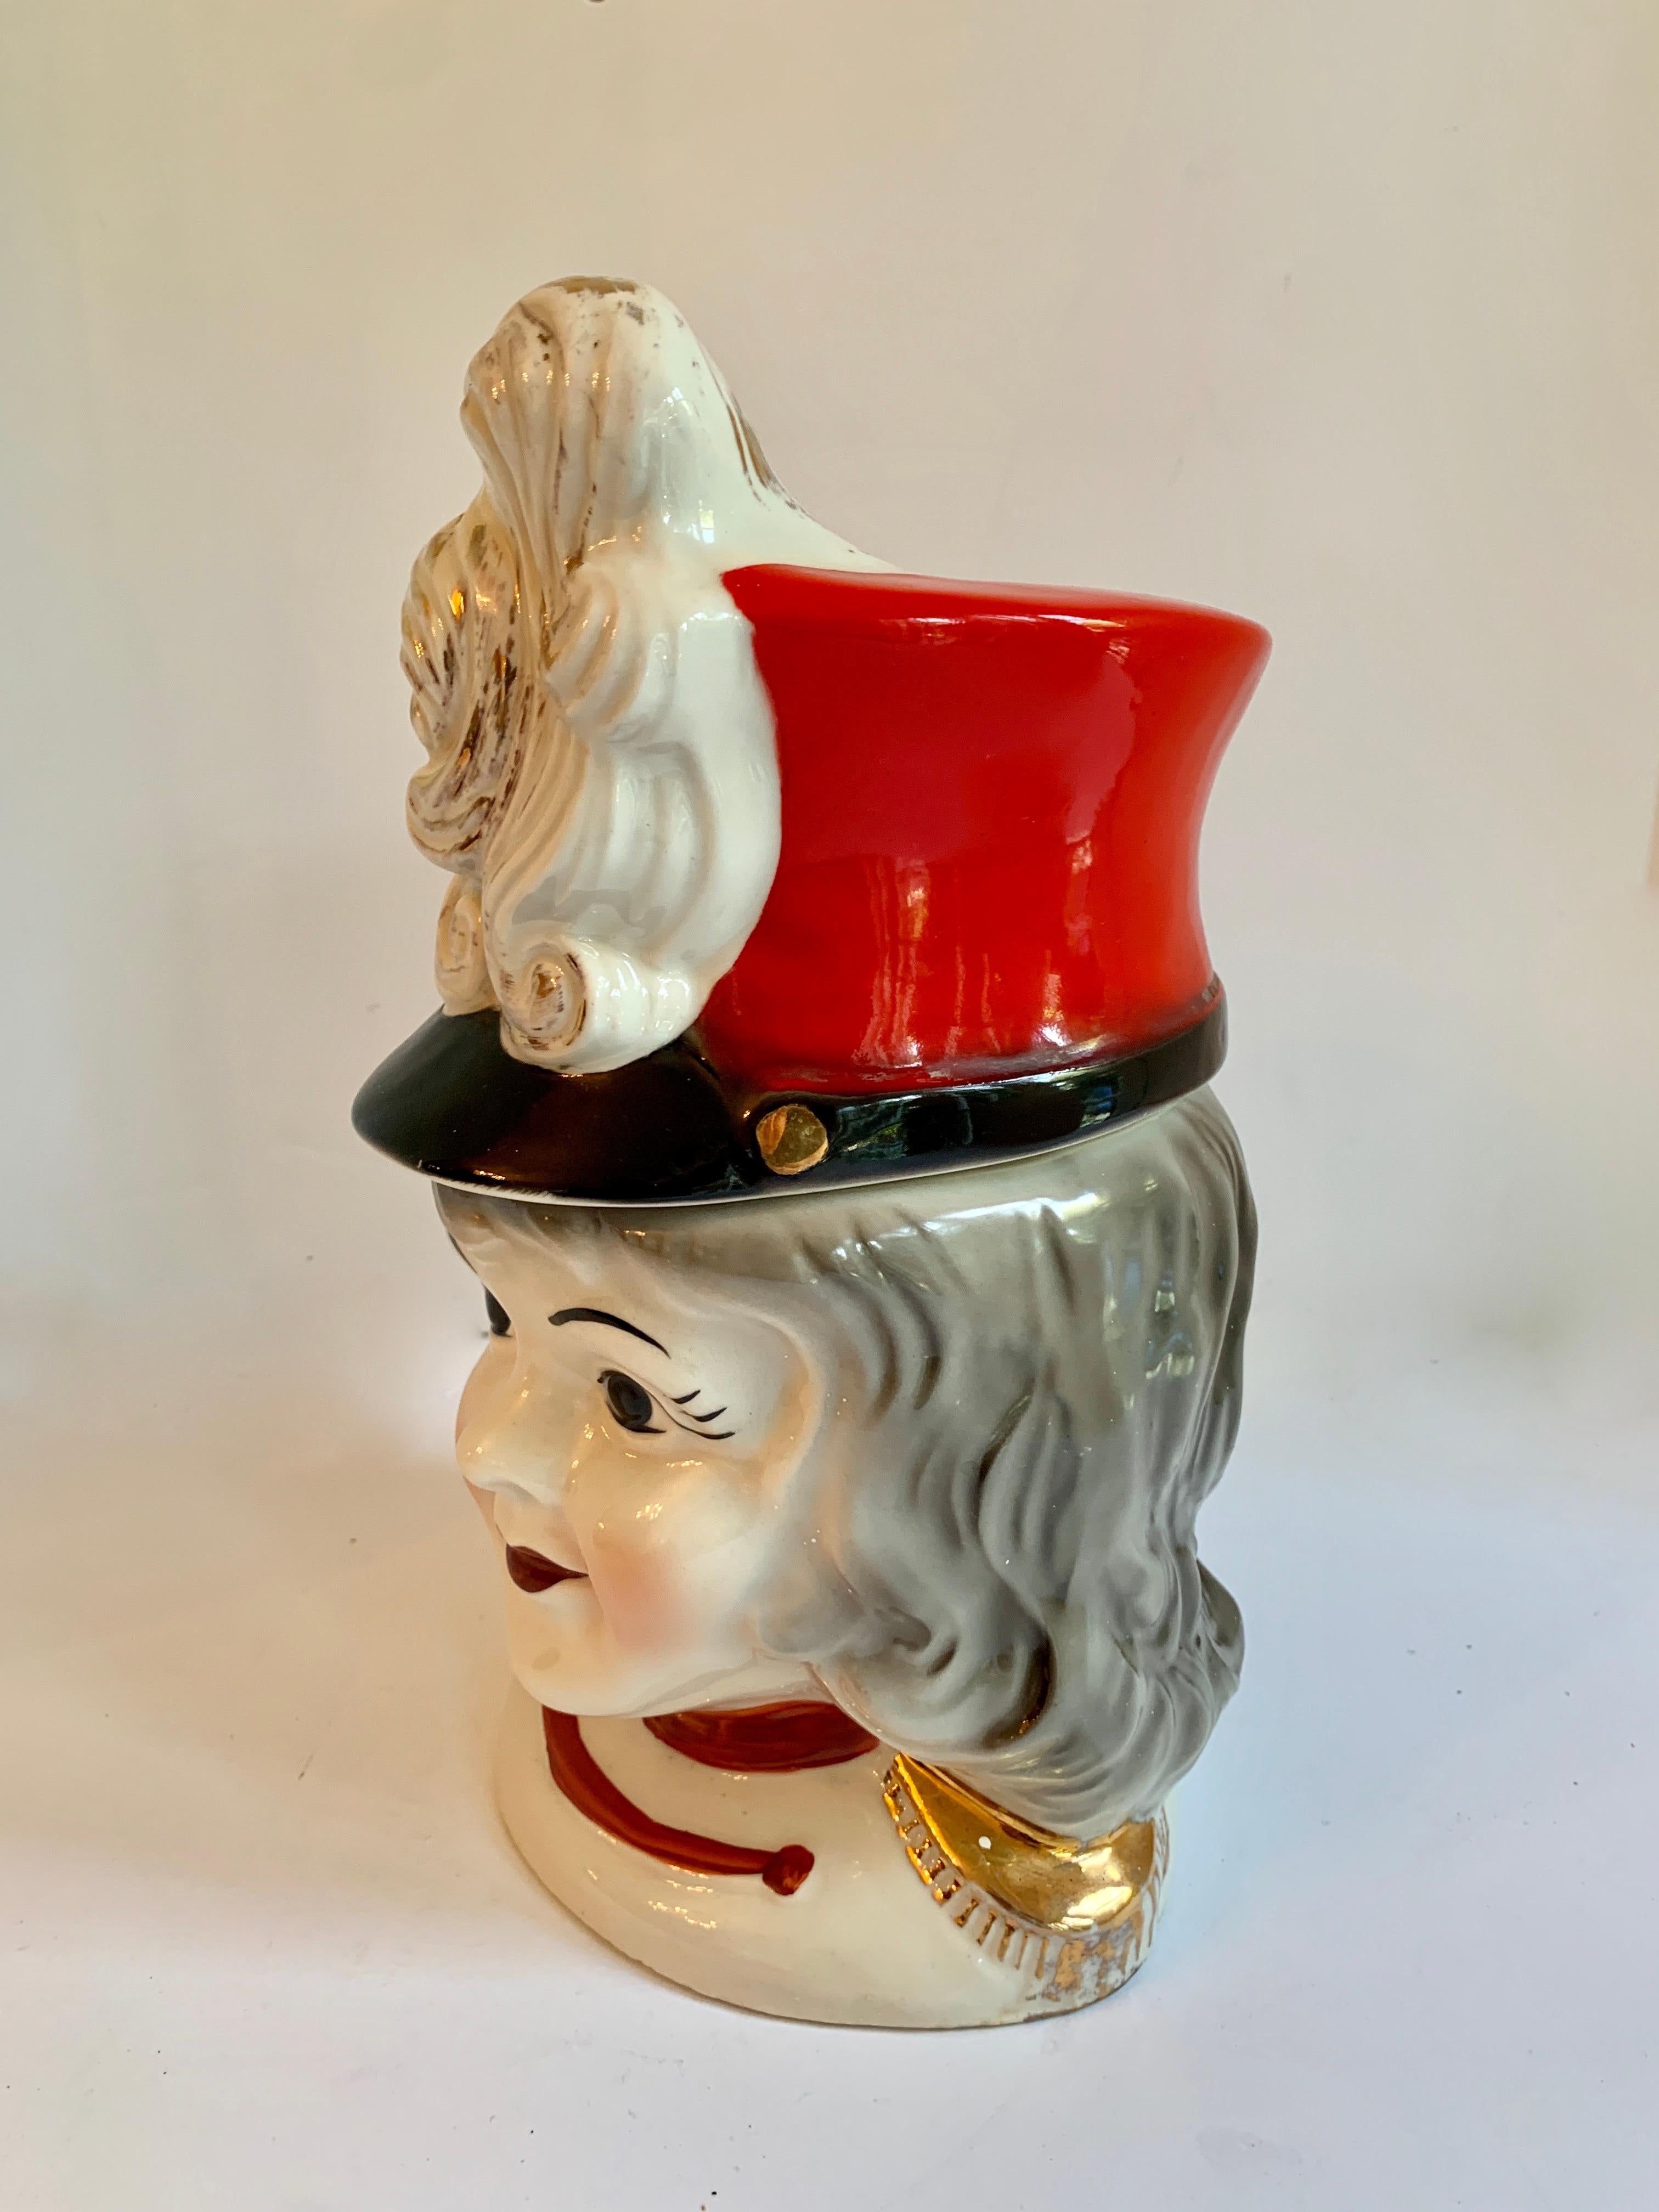 Vintage cookie jar - Majorette. The perfect place to store your cookies for kids or pets!